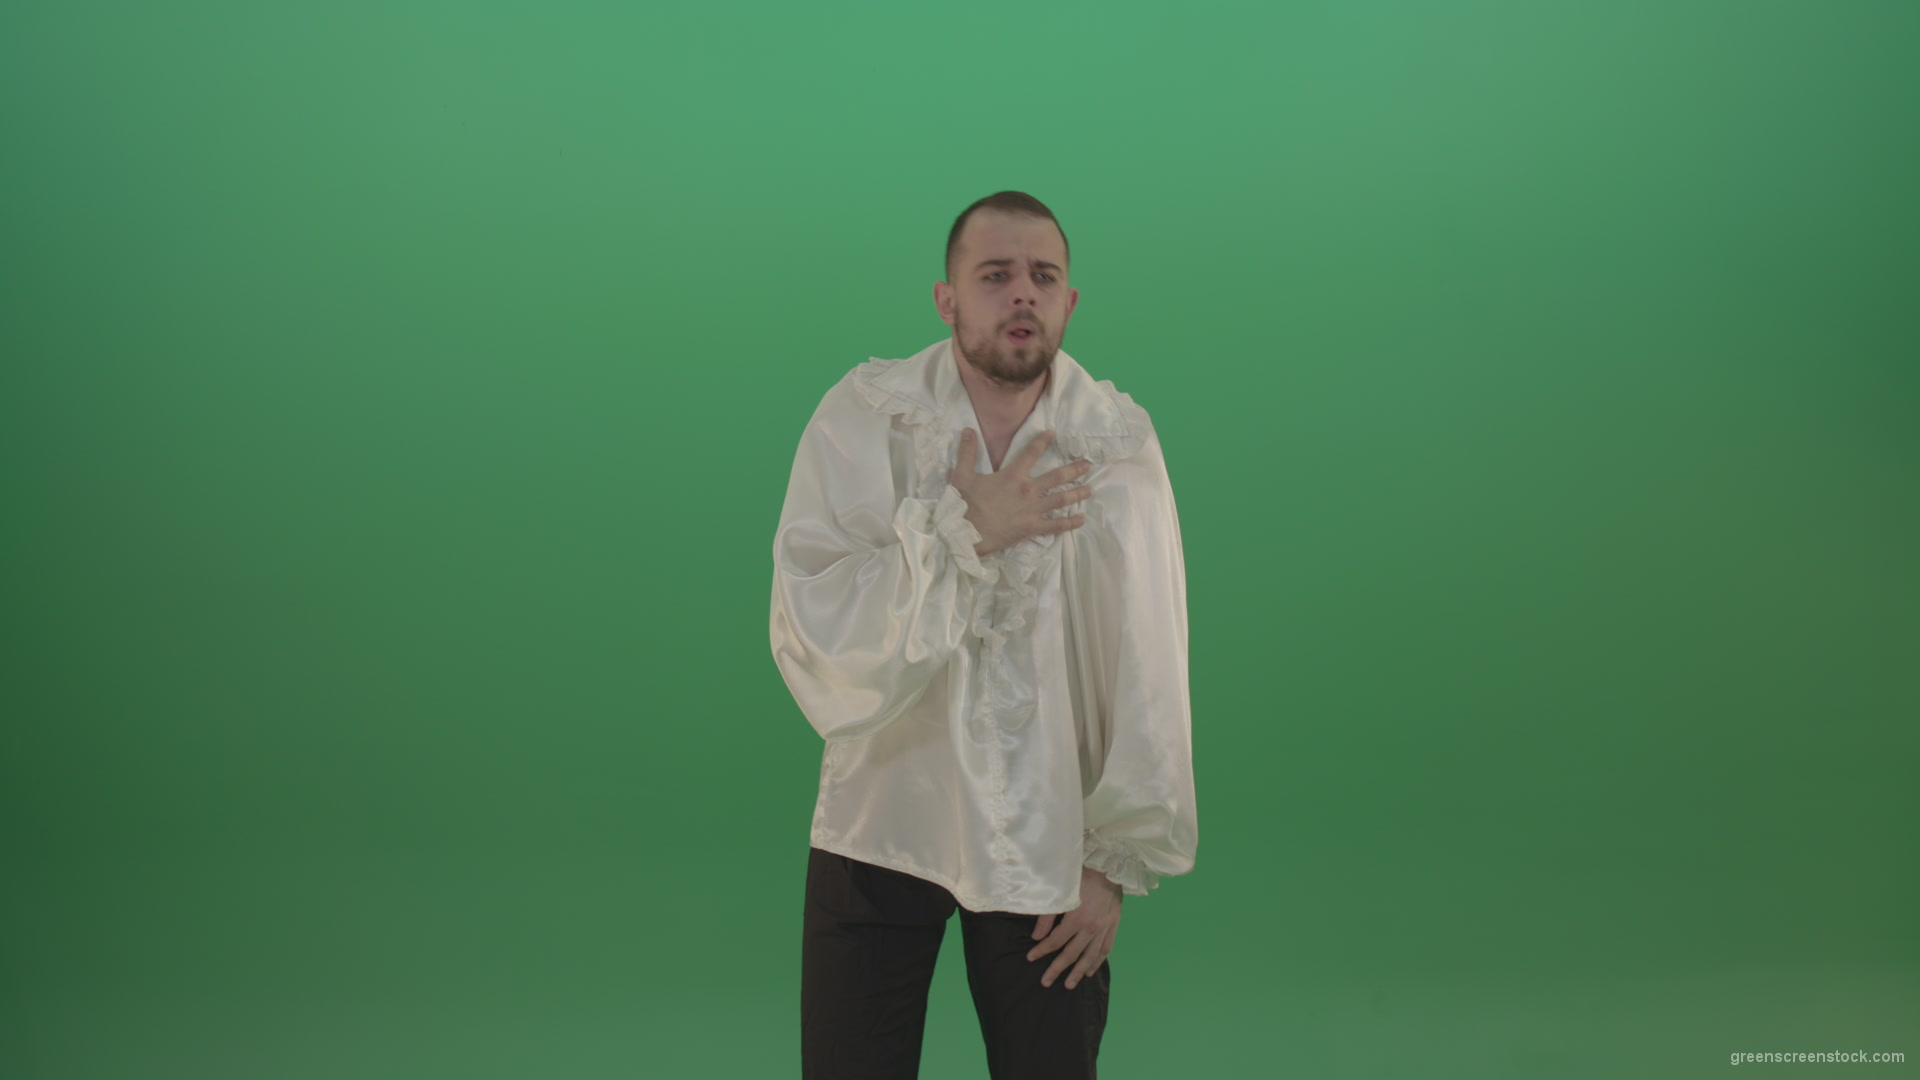 Man-is-very-coughing-infected-with-a-virus-isolated-on-chromakey-background_008 Green Screen Stock